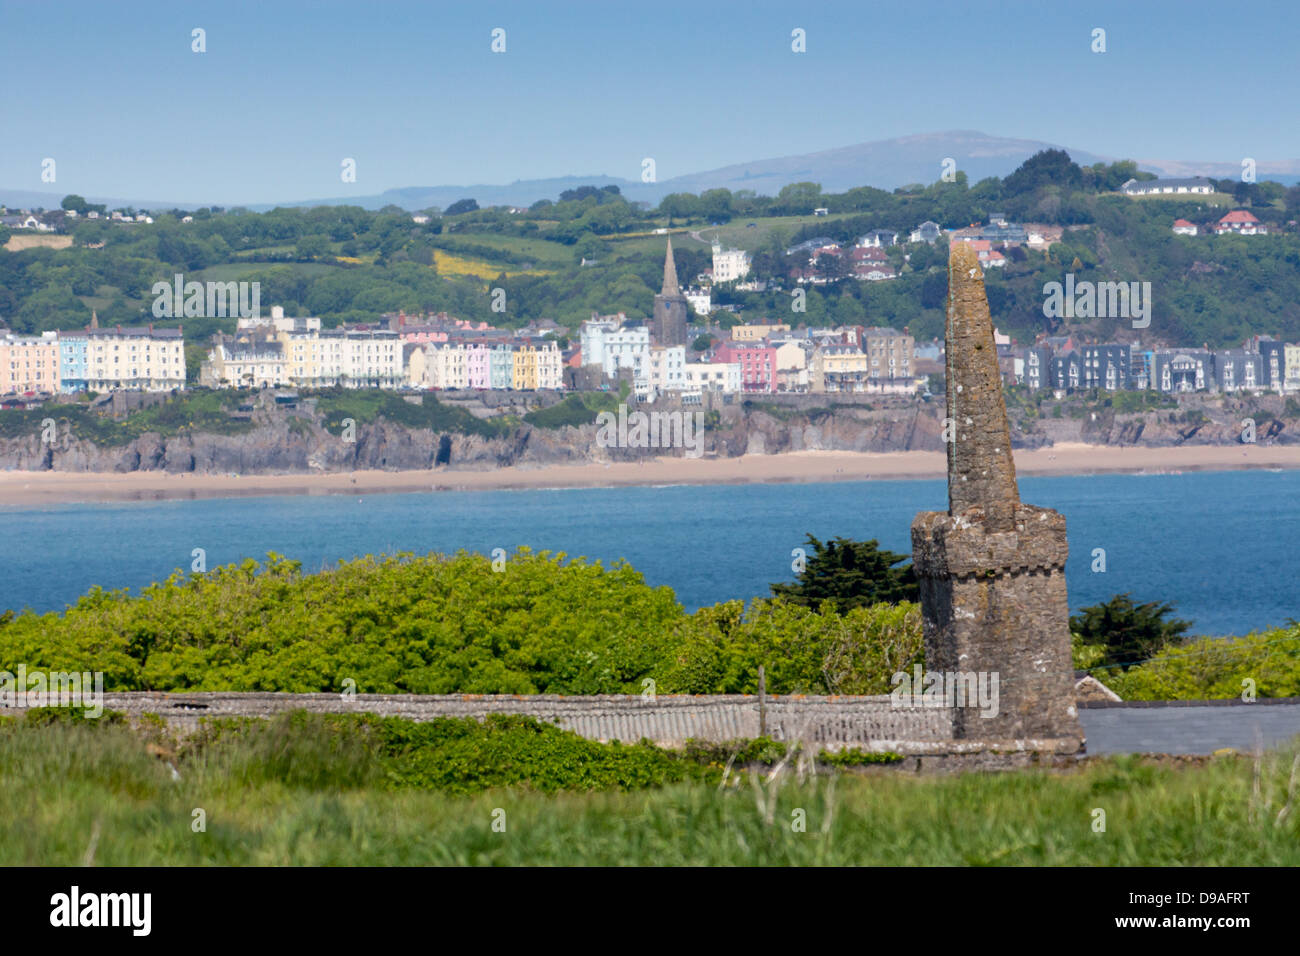 The crooked spire of St Illtud's Church on Caldey Island with South Beach and Tenby town in background Pembrokeshire Wales UK Stock Photo